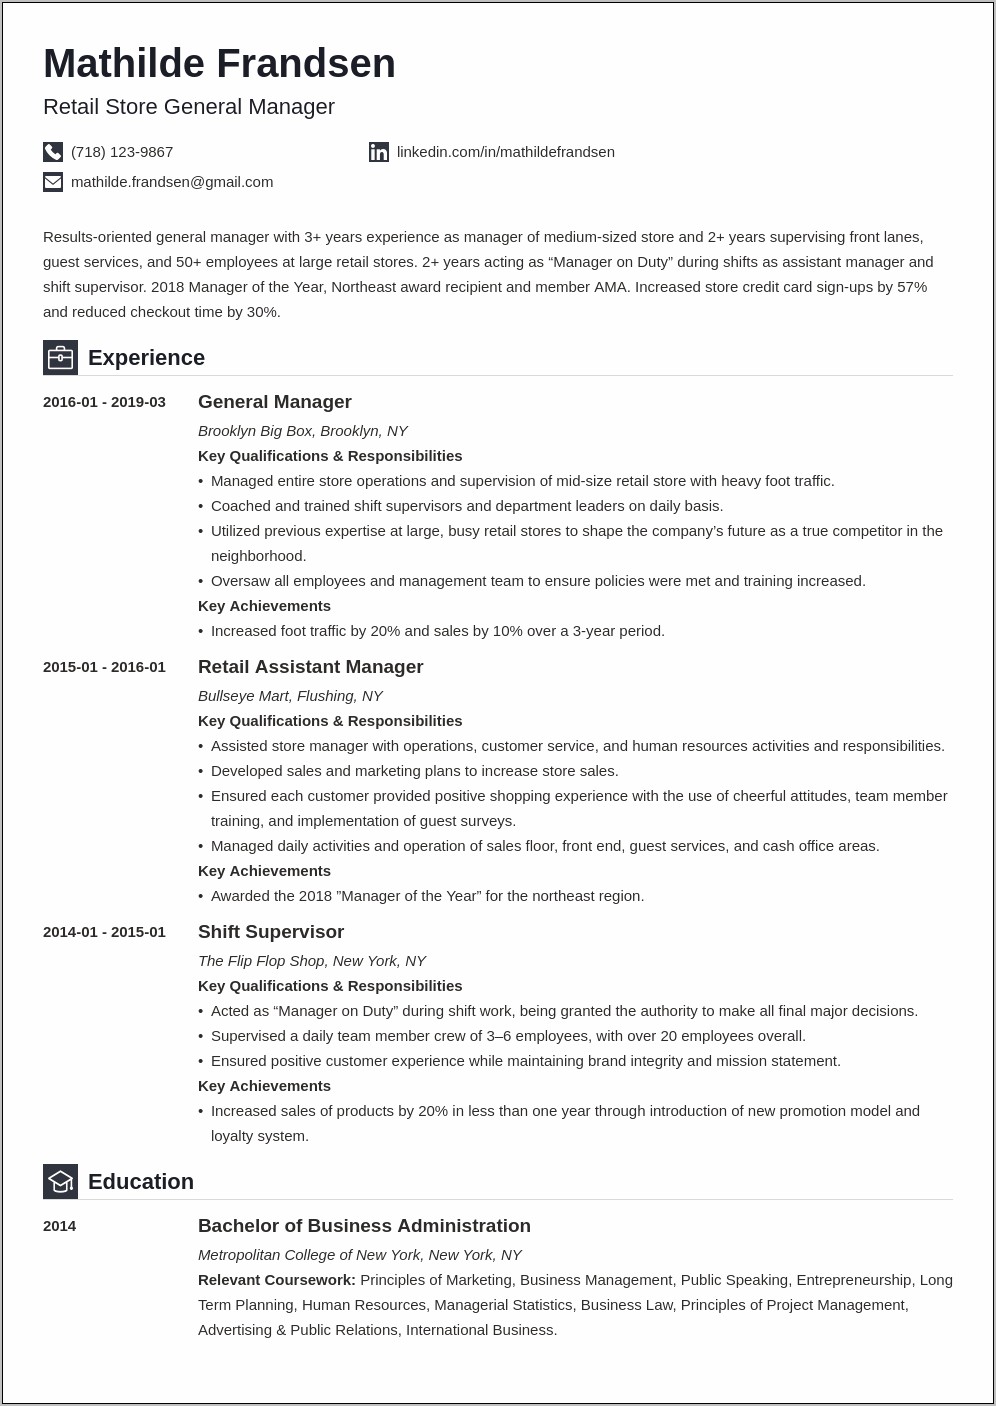 Resume Headline For Department Manager In Retail